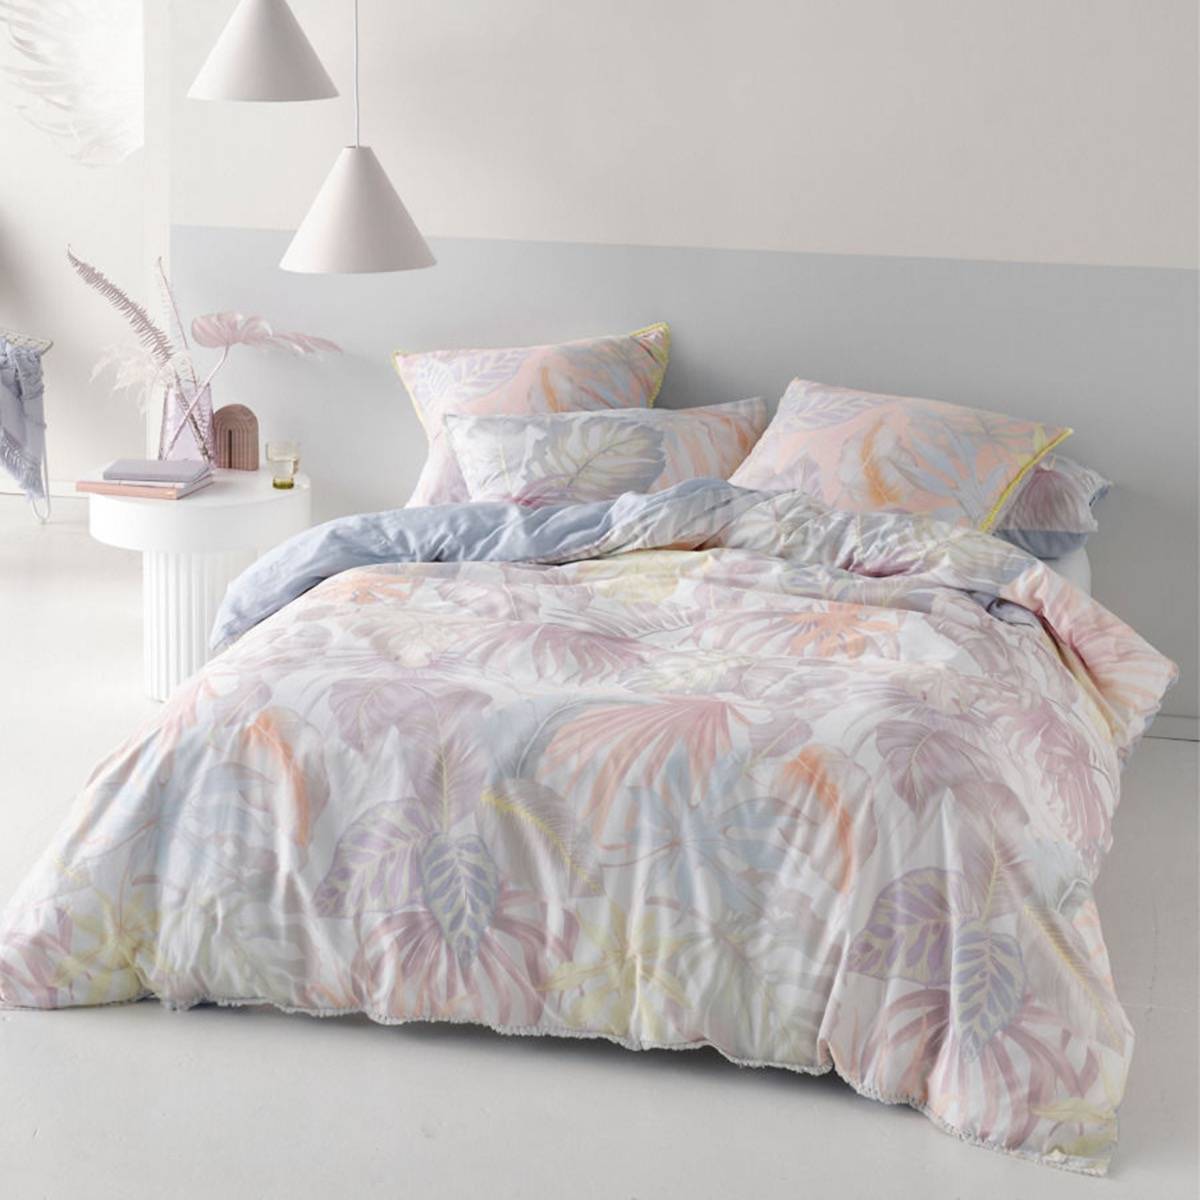 Utopia Sky Quilt Cover Set by Linen House